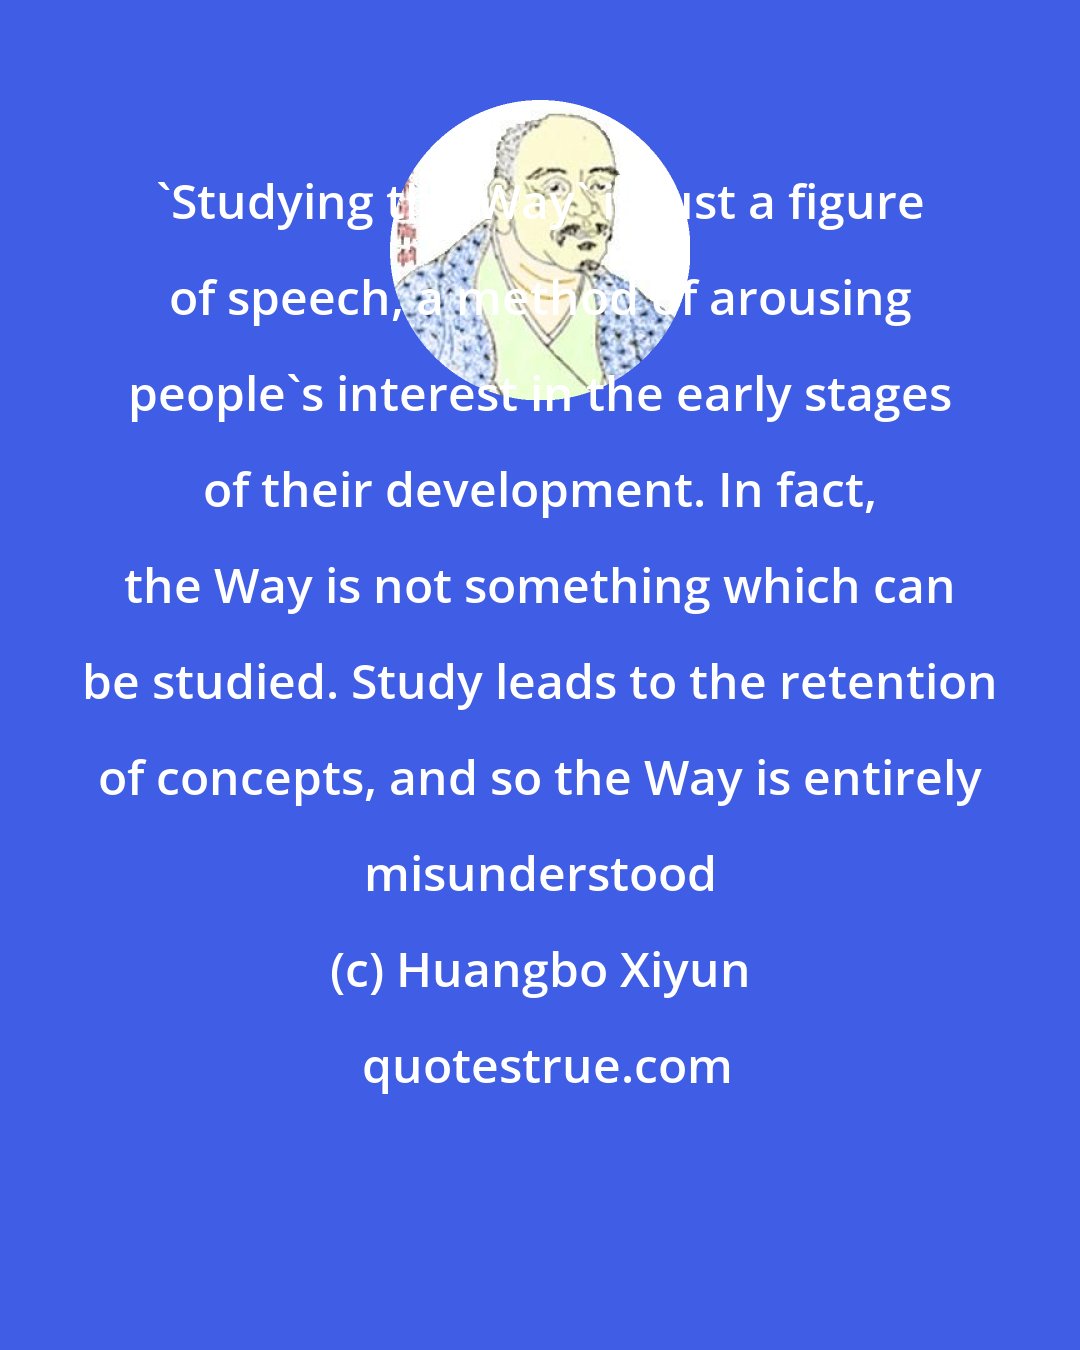 Huangbo Xiyun: 'Studying the Way' is just a figure of speech, a method of arousing people's interest in the early stages of their development. In fact, the Way is not something which can be studied. Study leads to the retention of concepts, and so the Way is entirely misunderstood